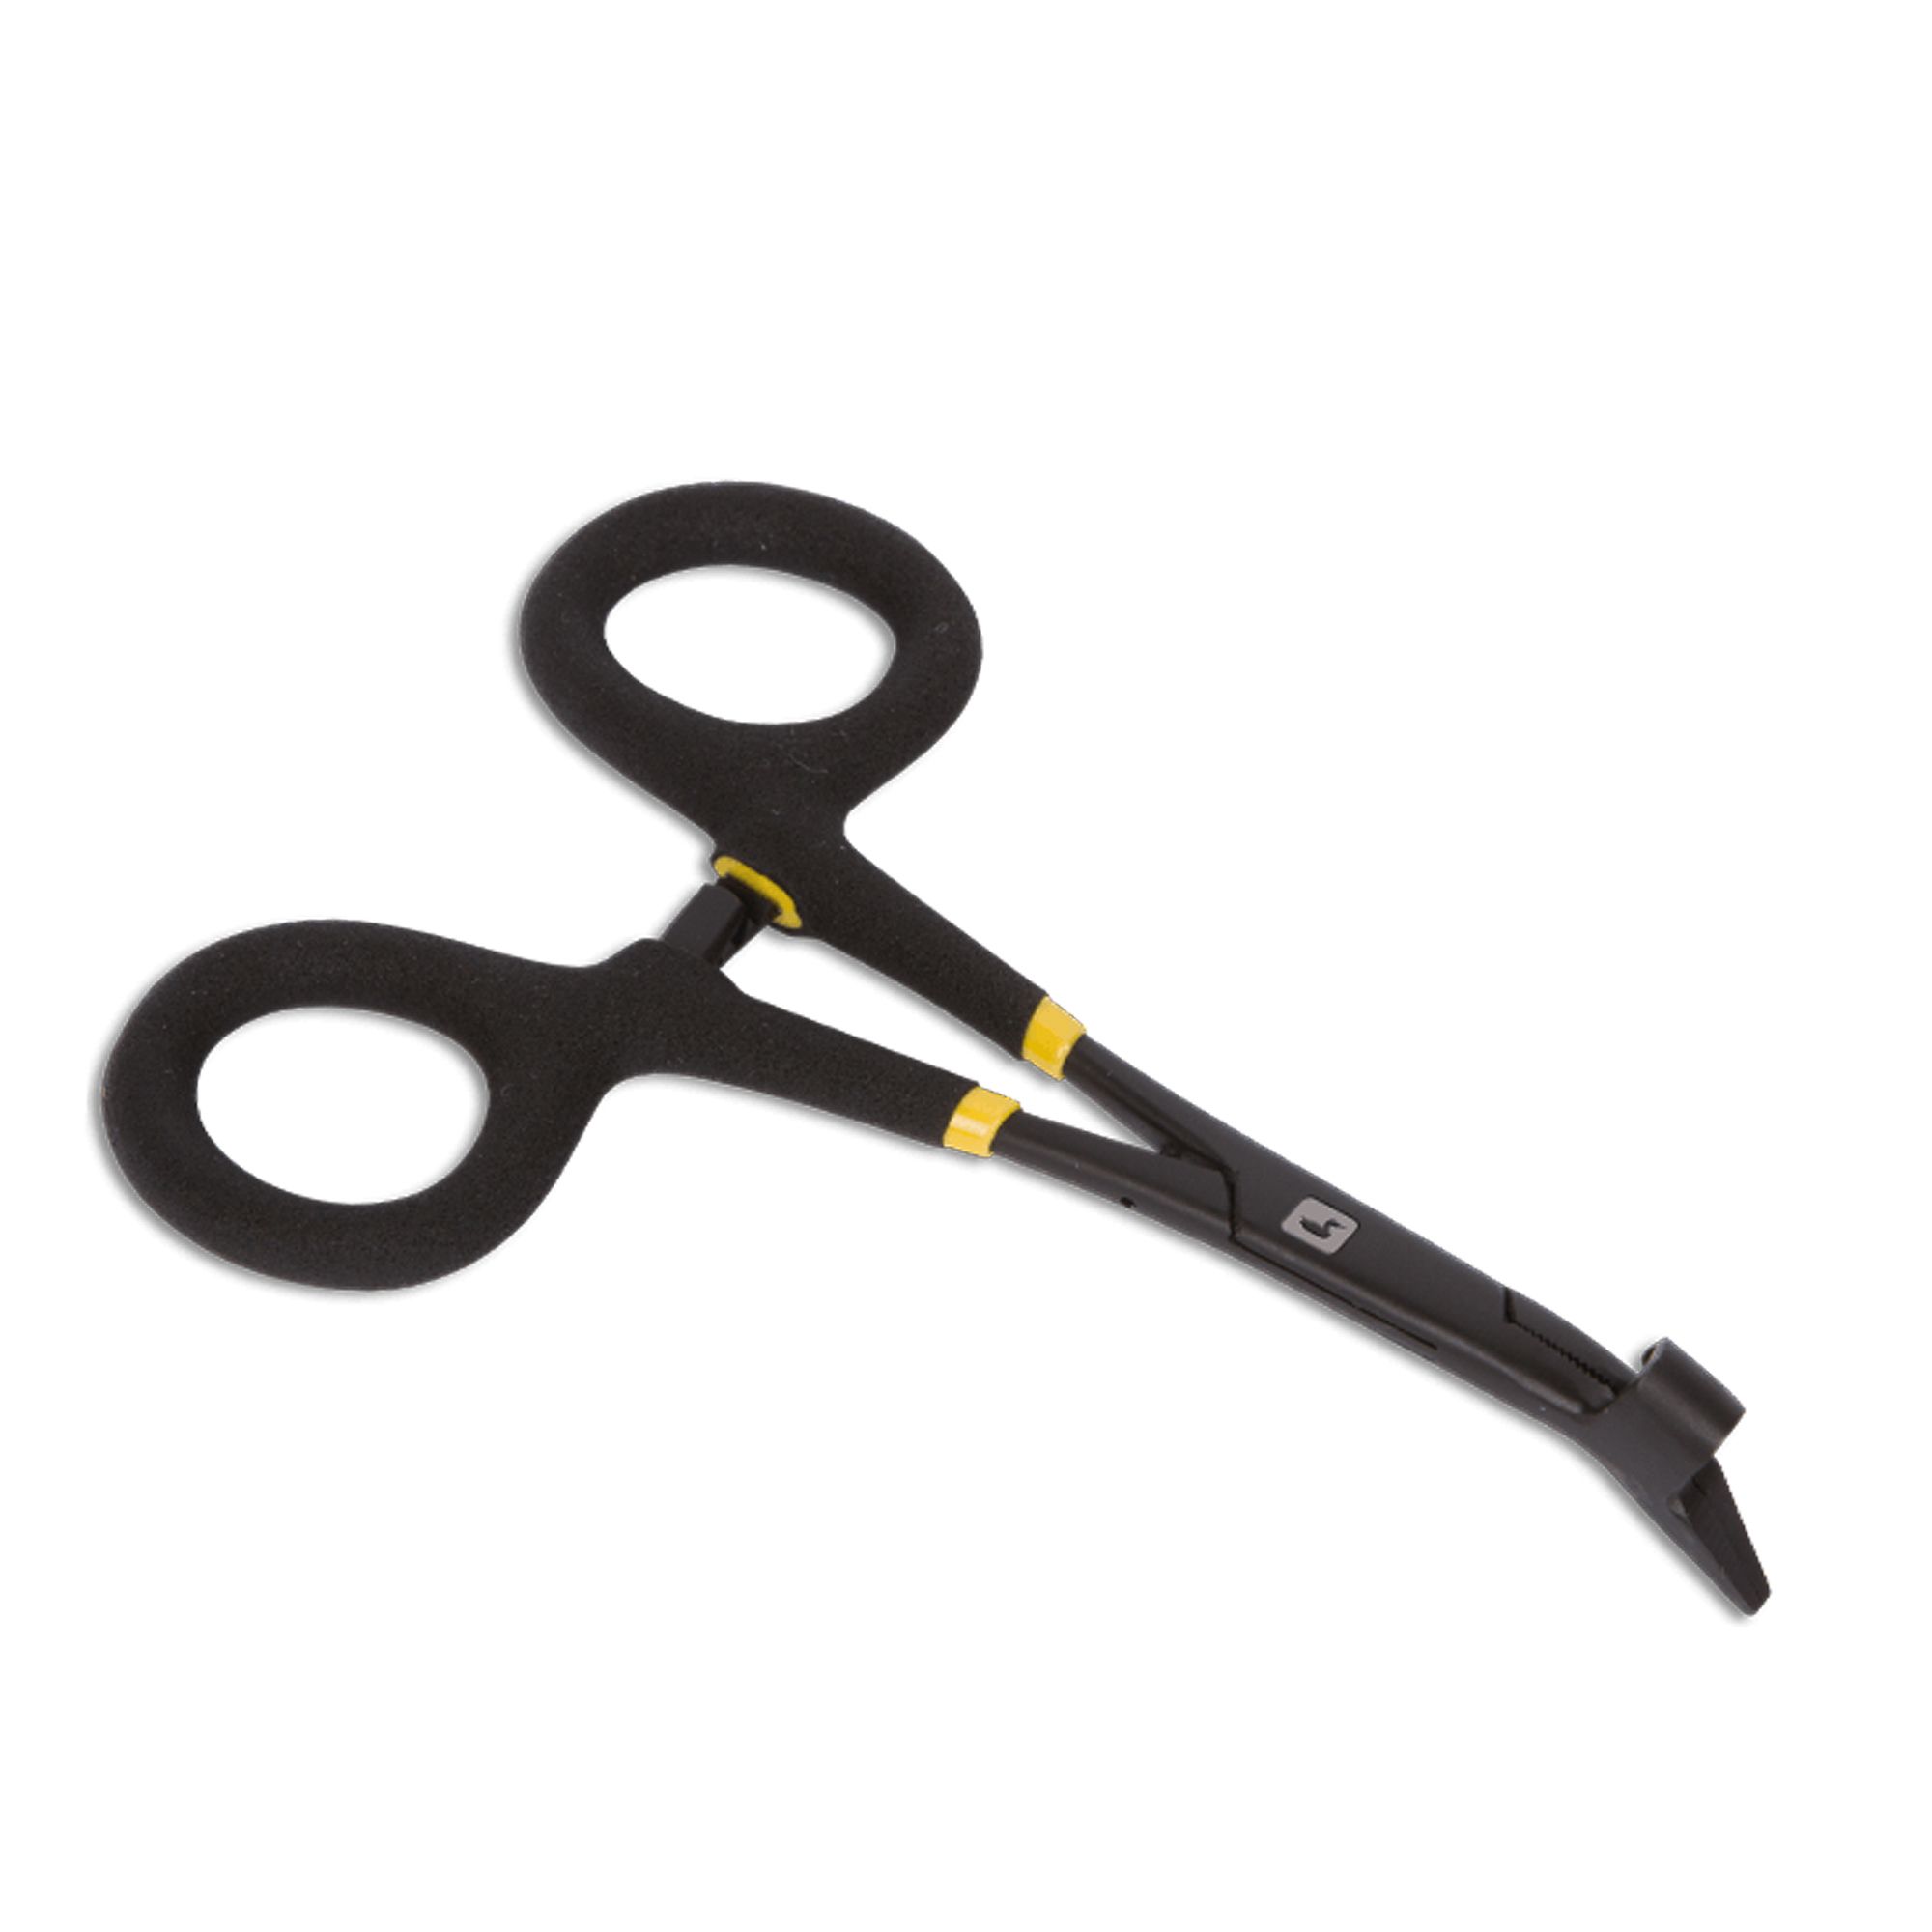 Loon Rogue Hook Removal Forceps W/Comfy Grip - Fin & Game